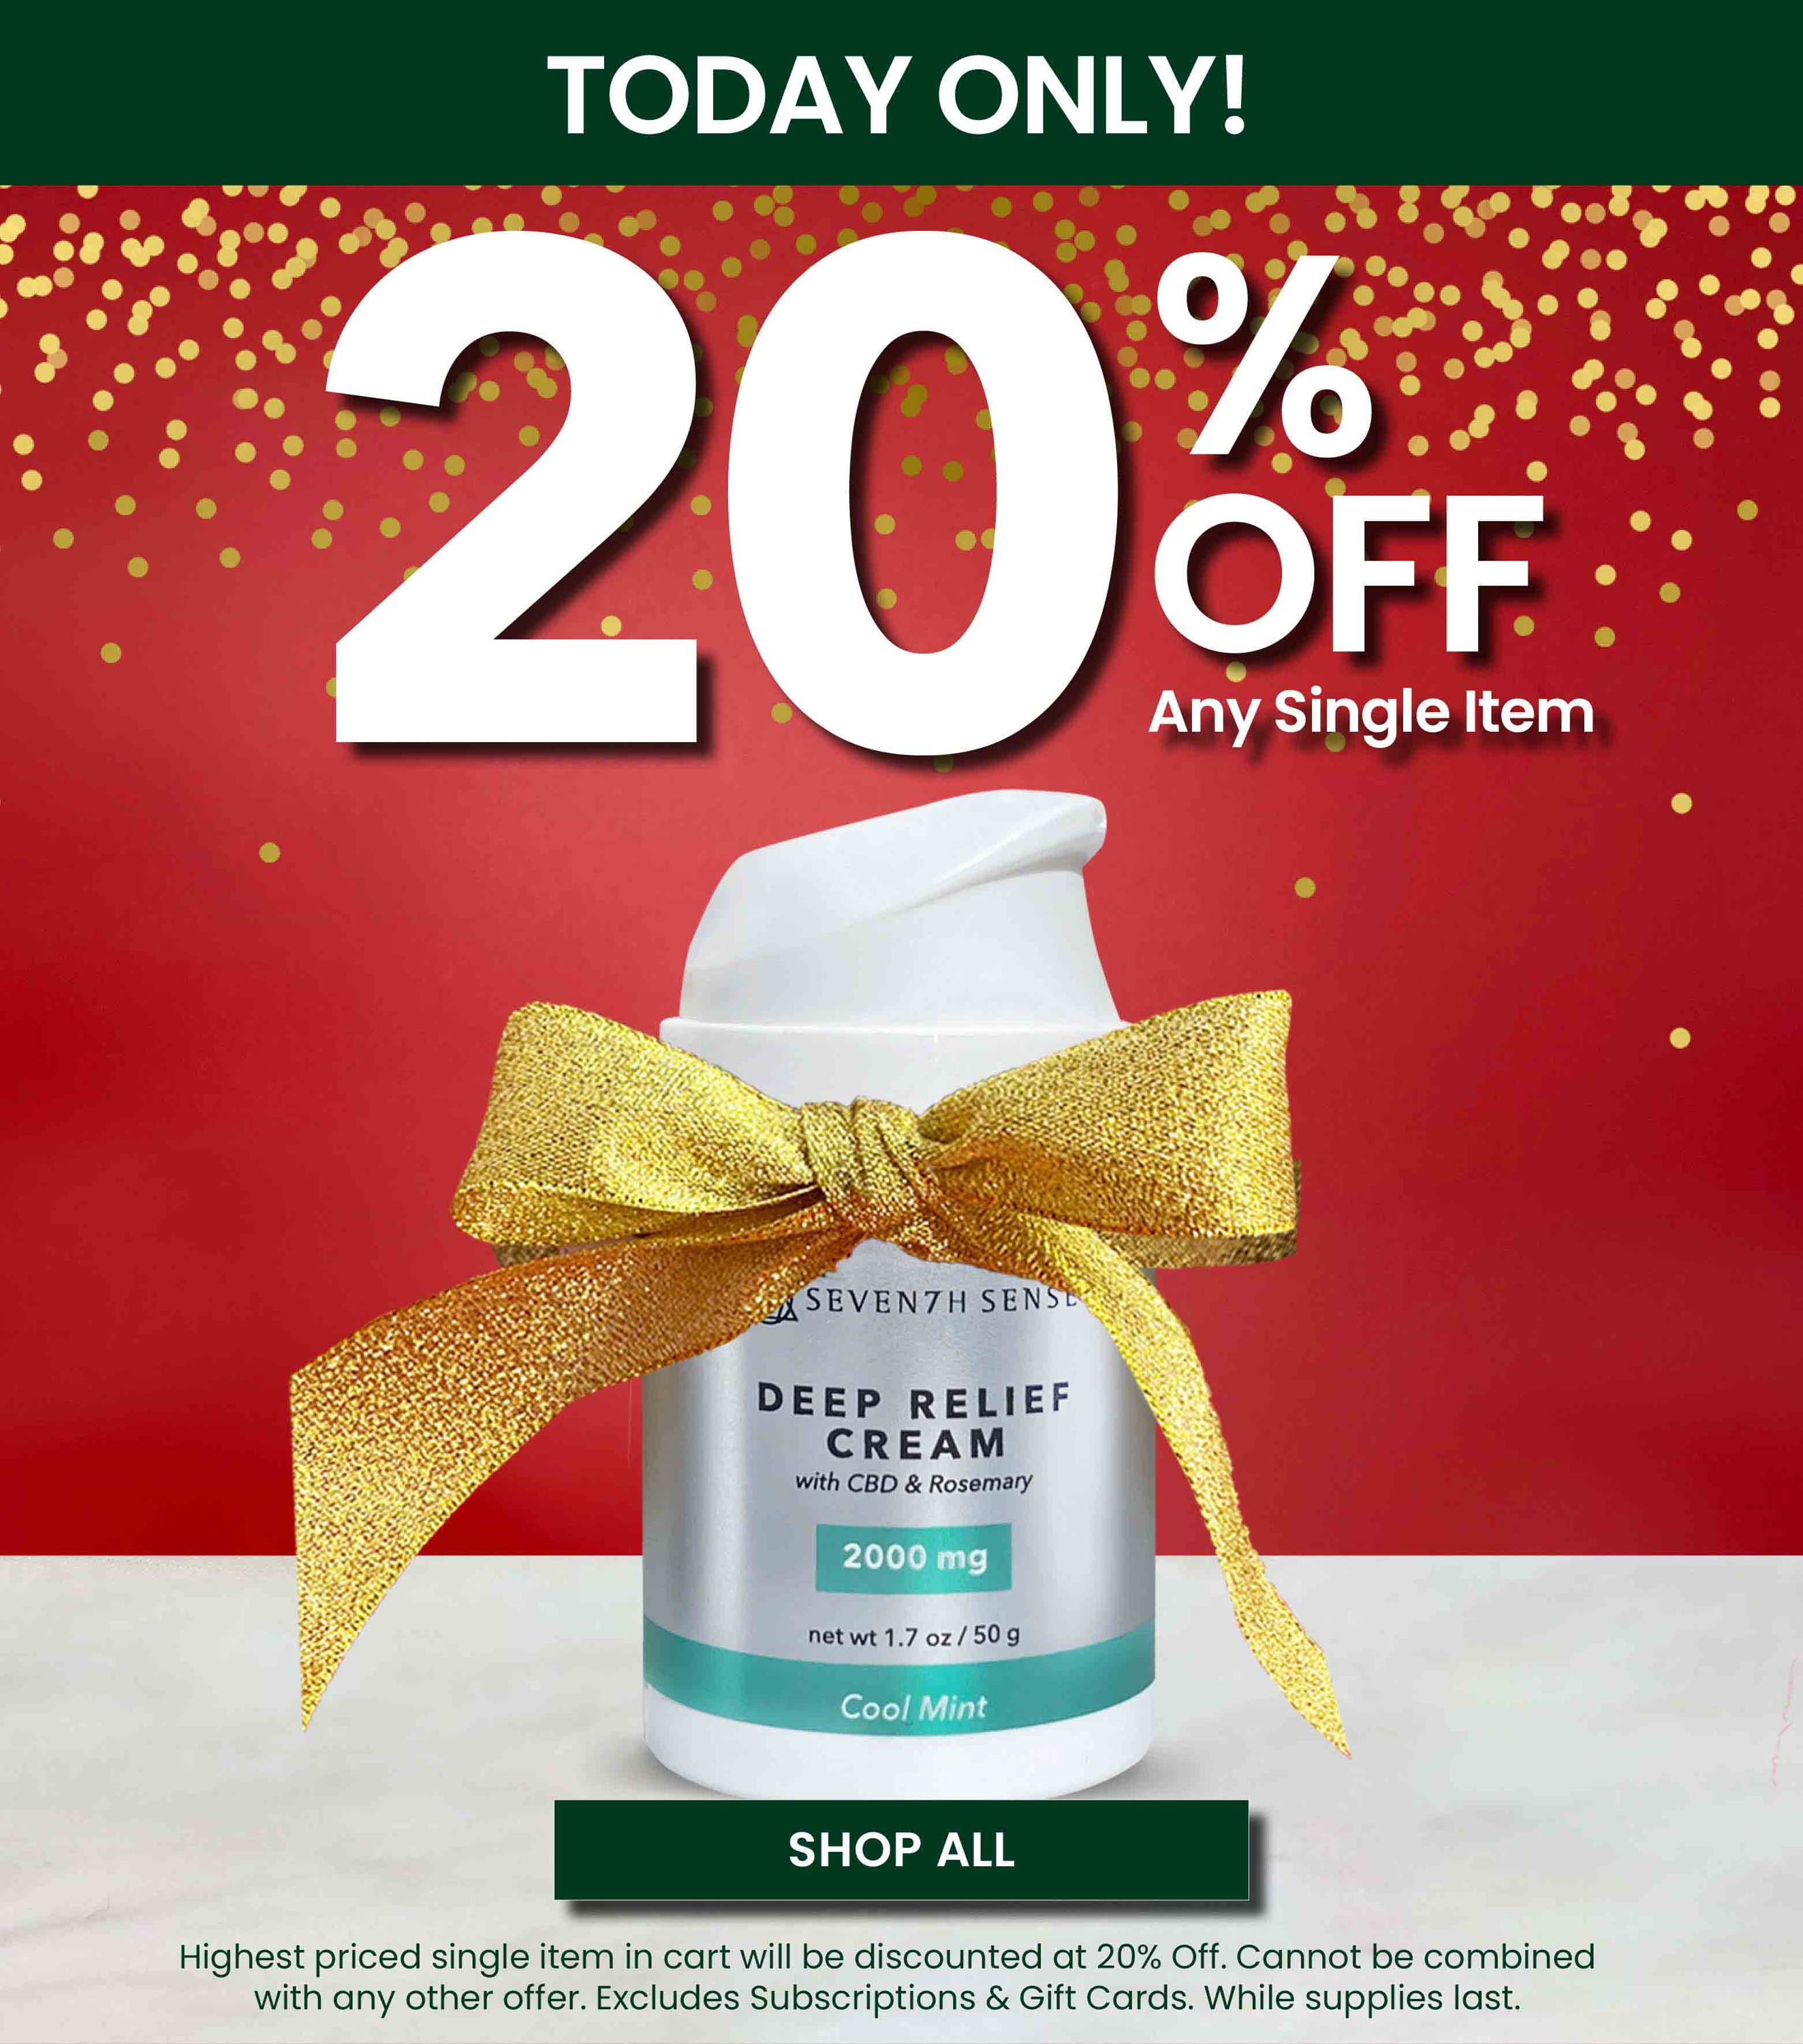 Today Only! 20% Off Any Single Item. 